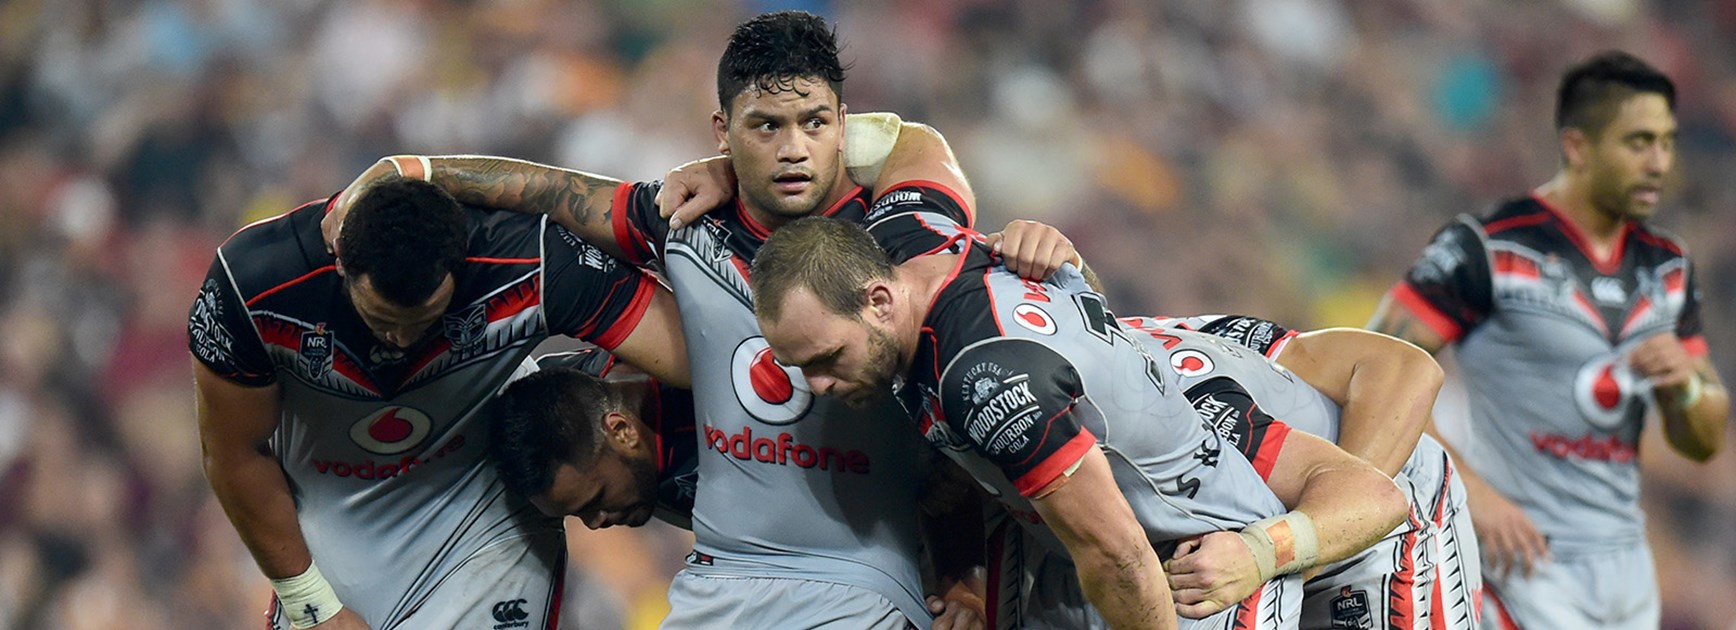 The Warriors ran out of gas against the Broncos after being reduced to 15 players through injury.